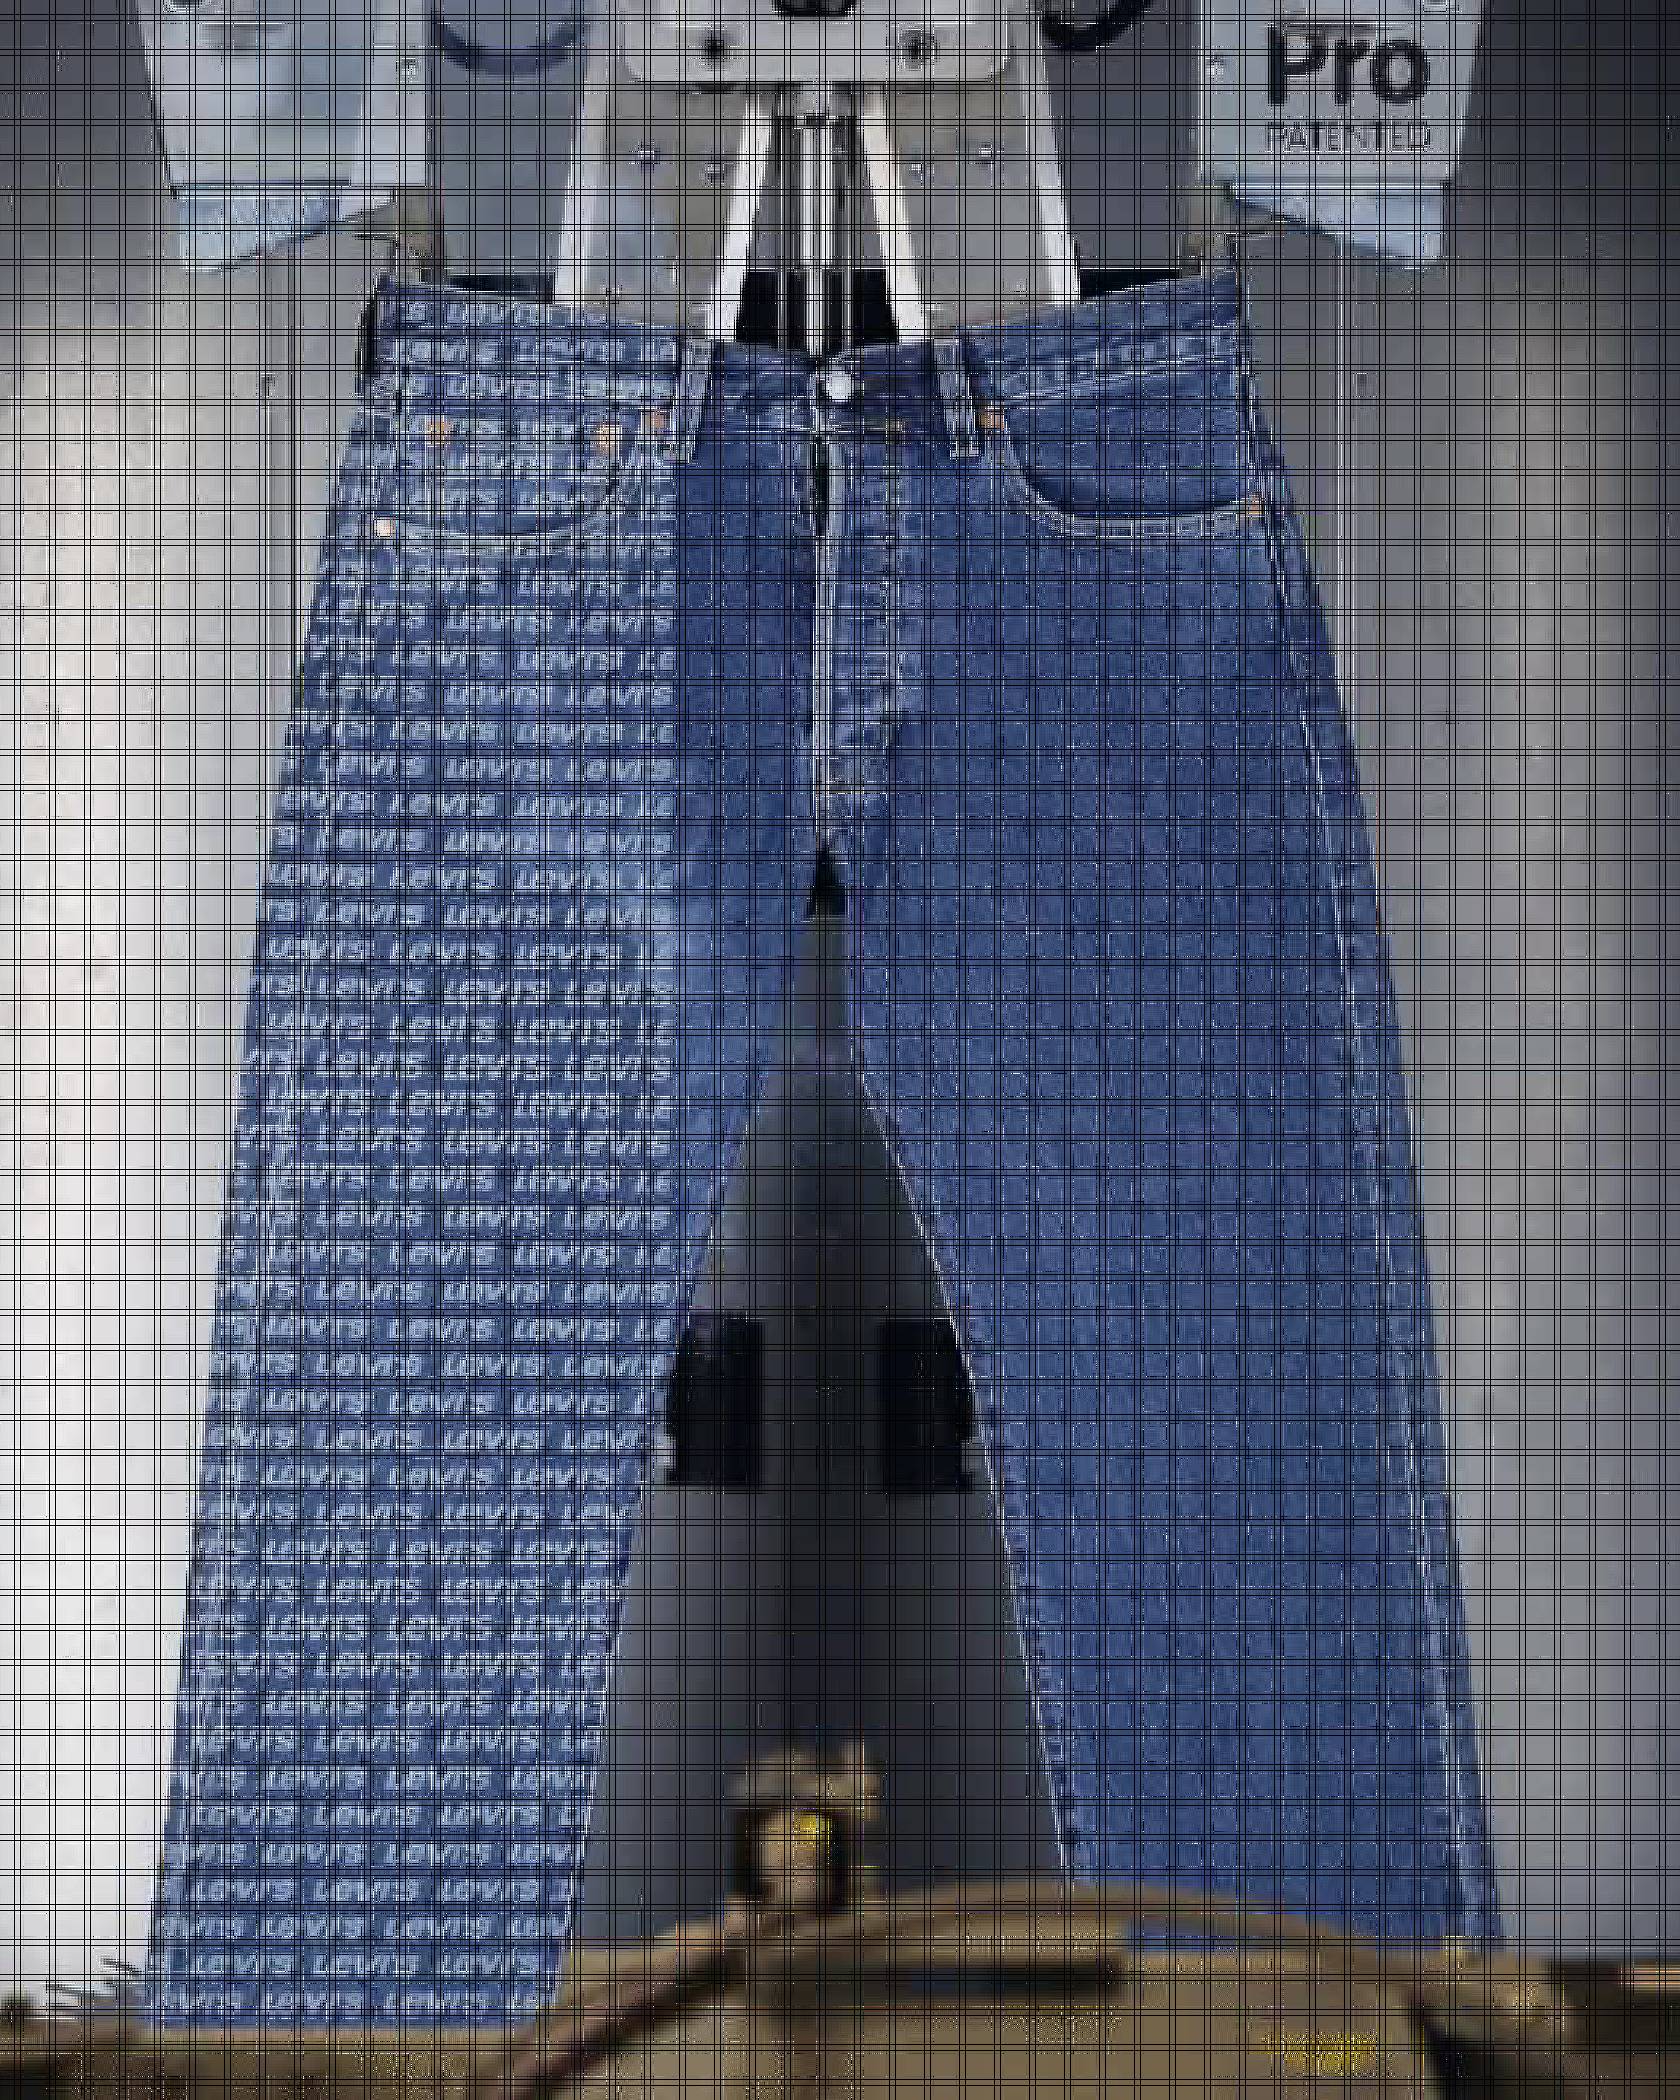 Video of Levi's® jeans and shorts going through the Future Finish laser-powered technology to create customized products.